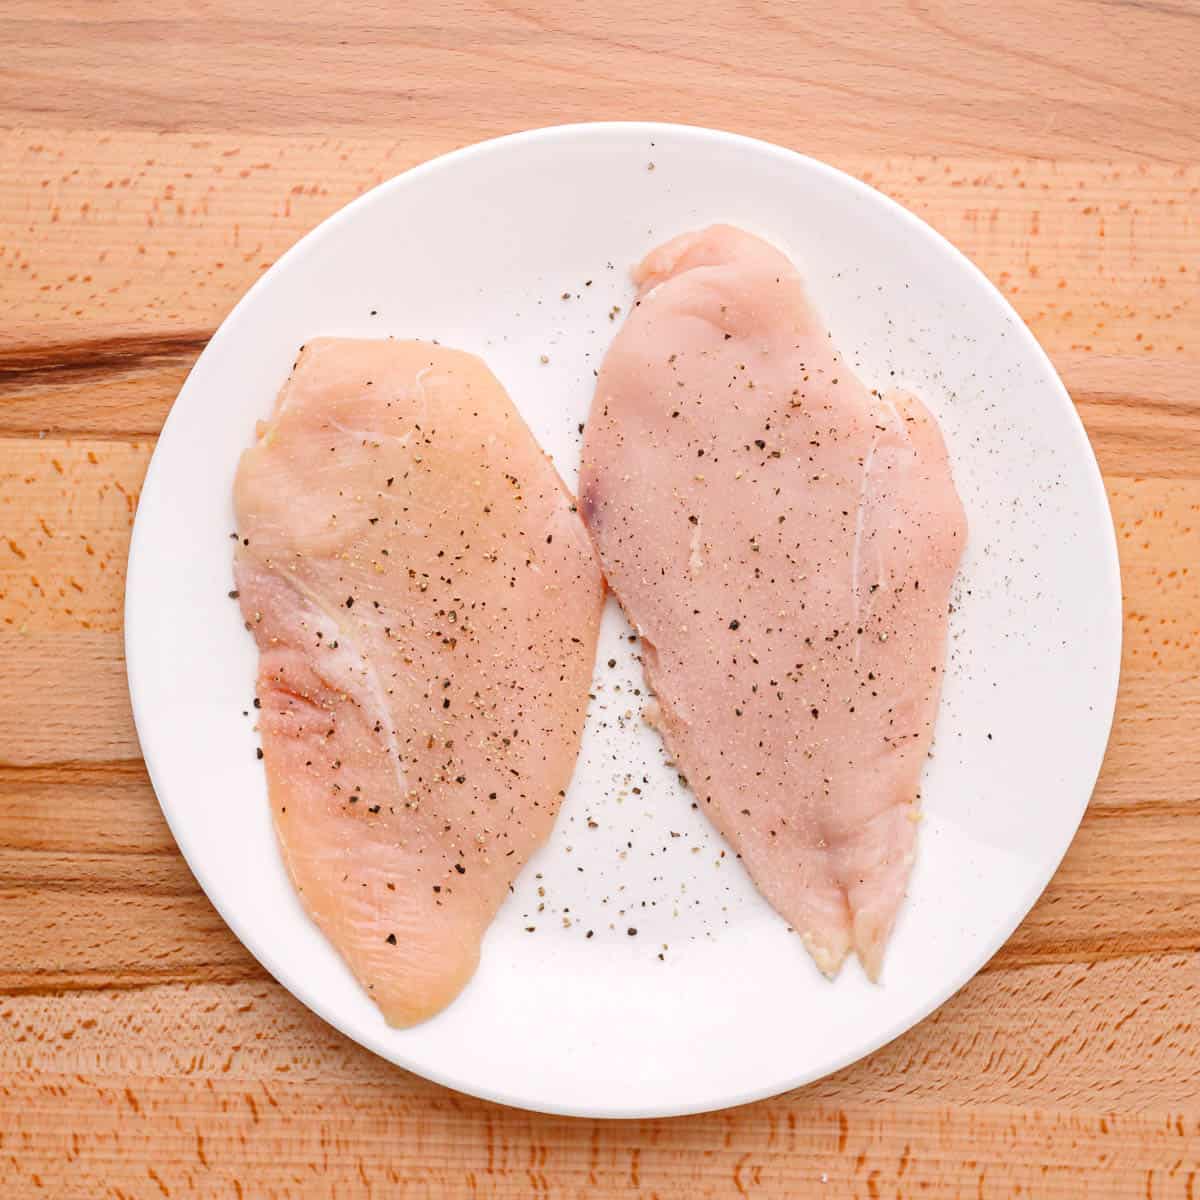 season chicken breasts with salt and pepper.